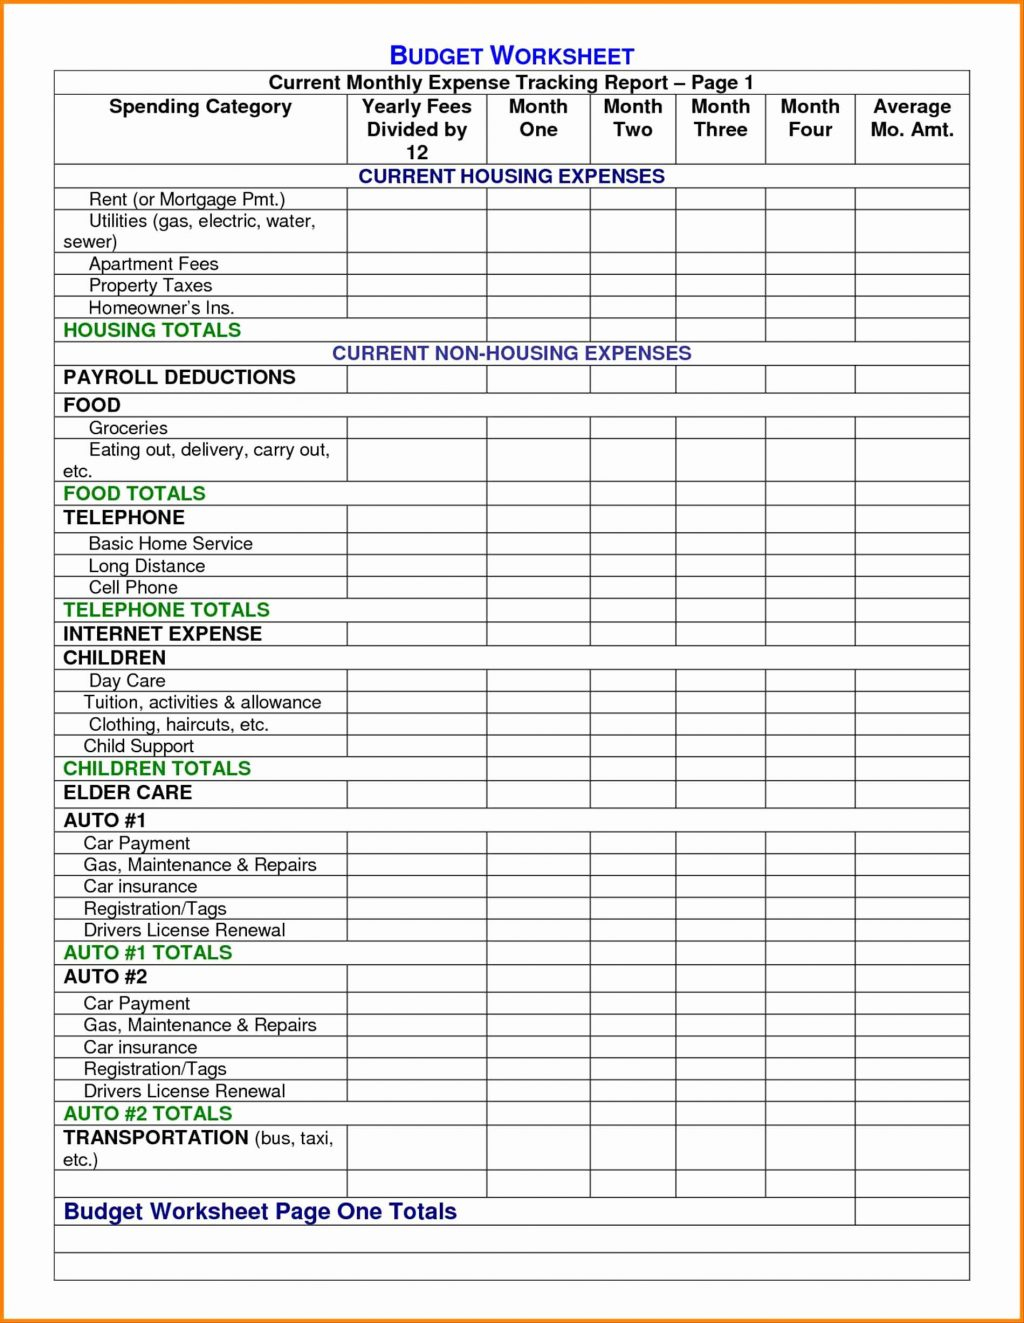 Example Of Farm Record Keeping Spreadsheets Accounting Spreadsheet To Farm Record Keeping Spreadsheets